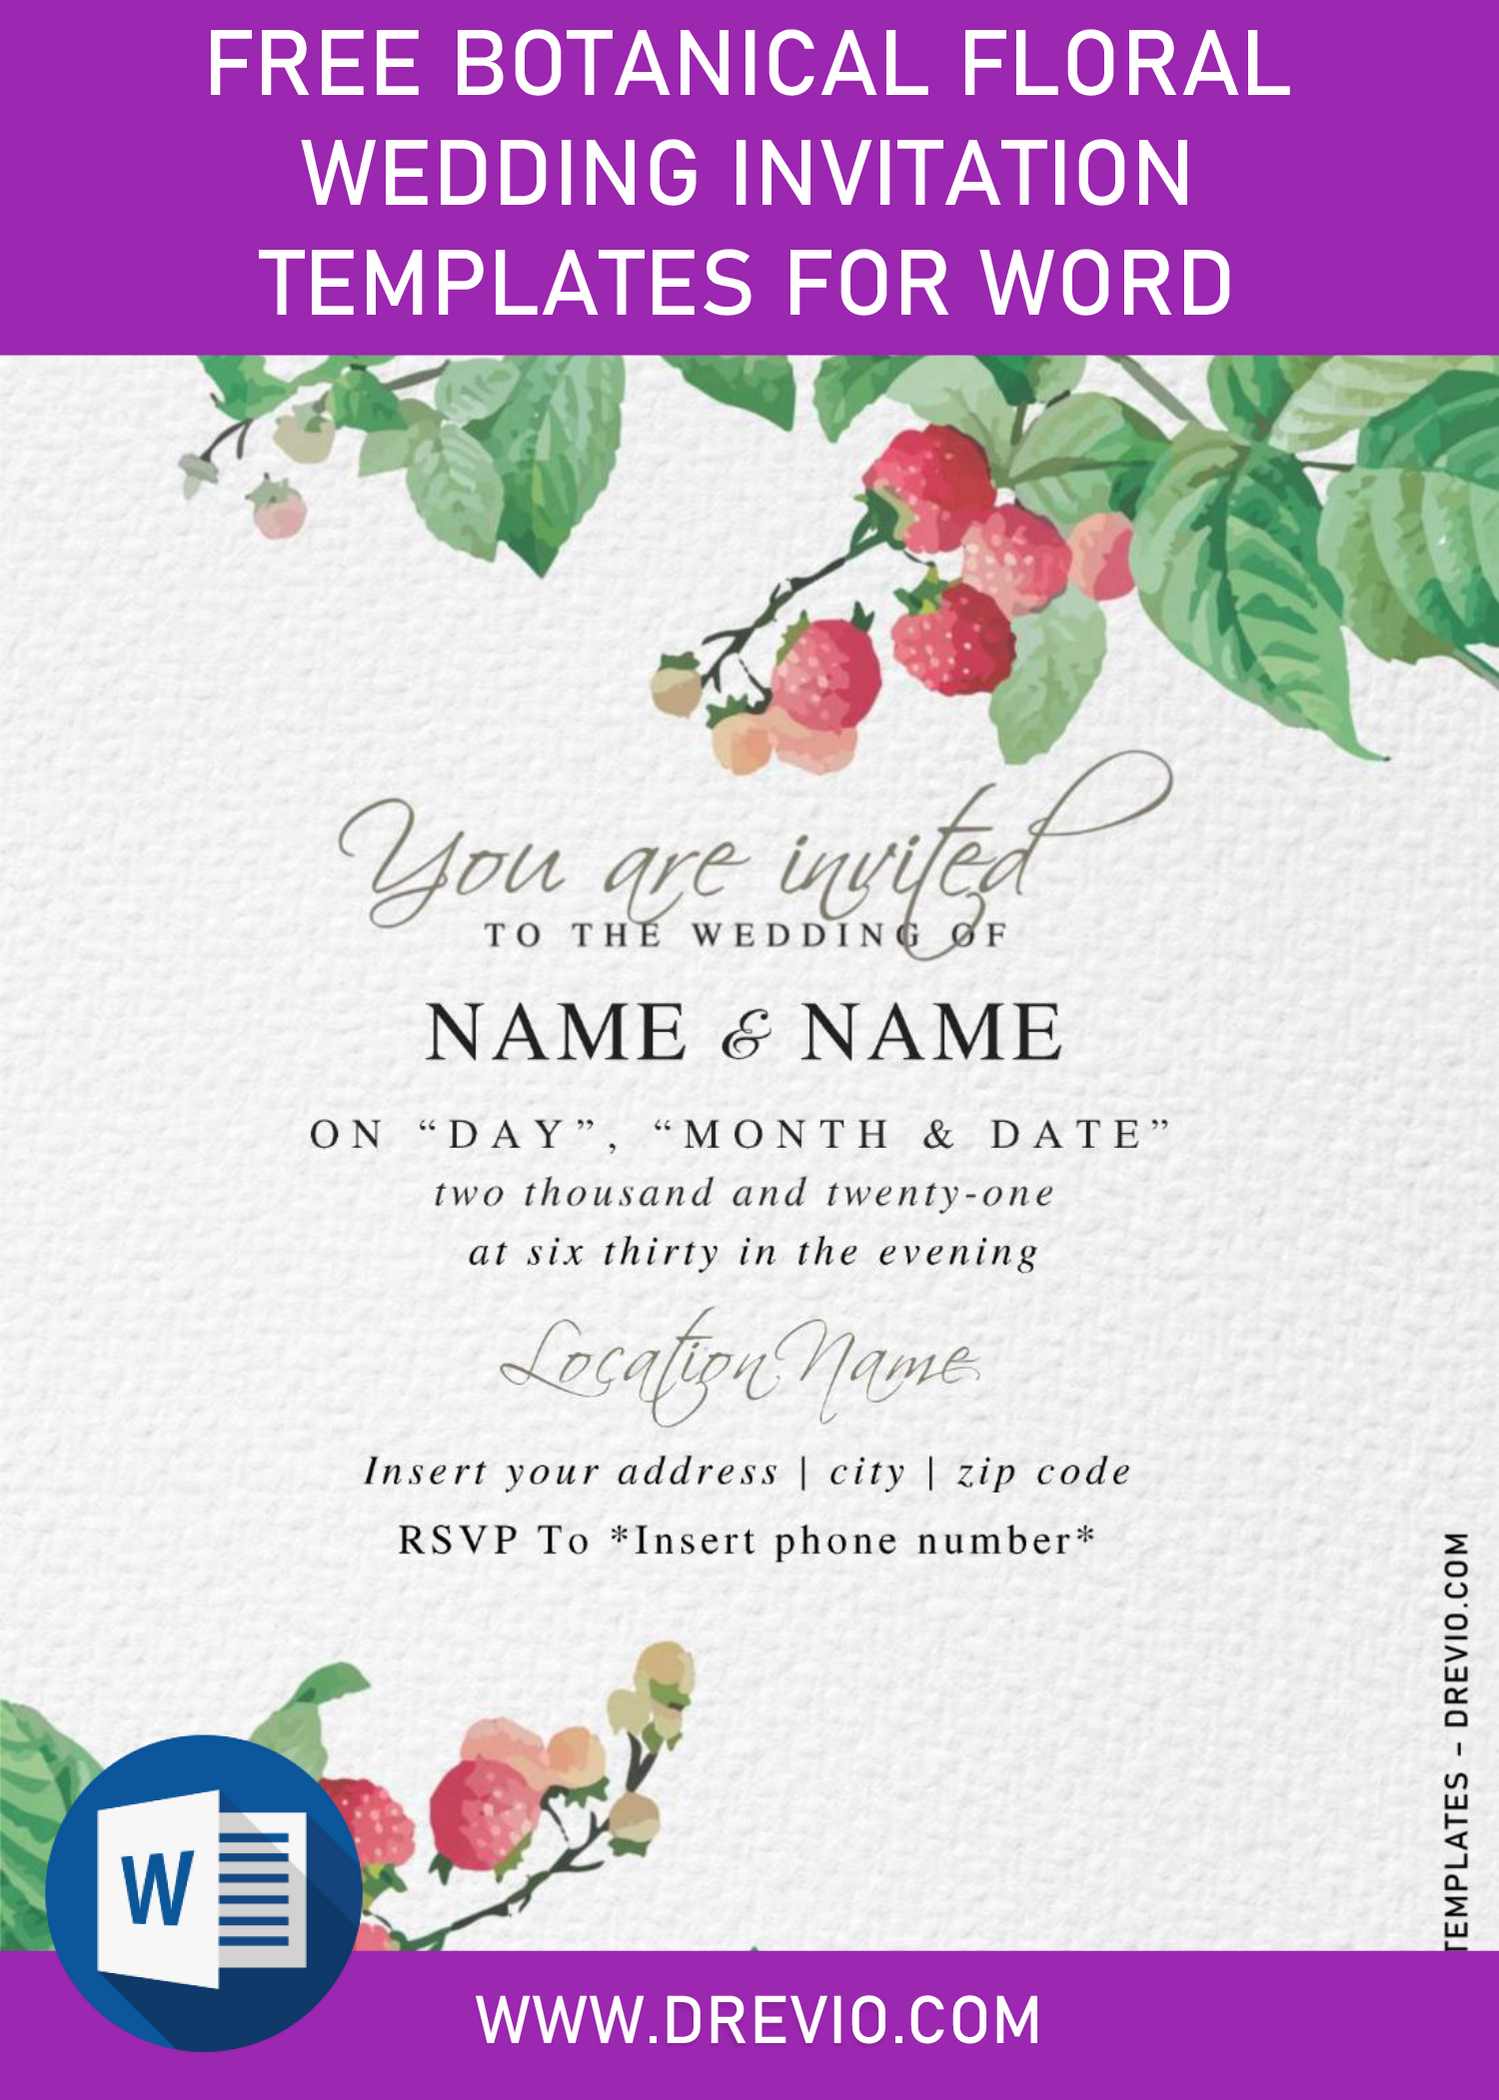 Free Botanical Floral Wedding Invitation Templates For Word and has